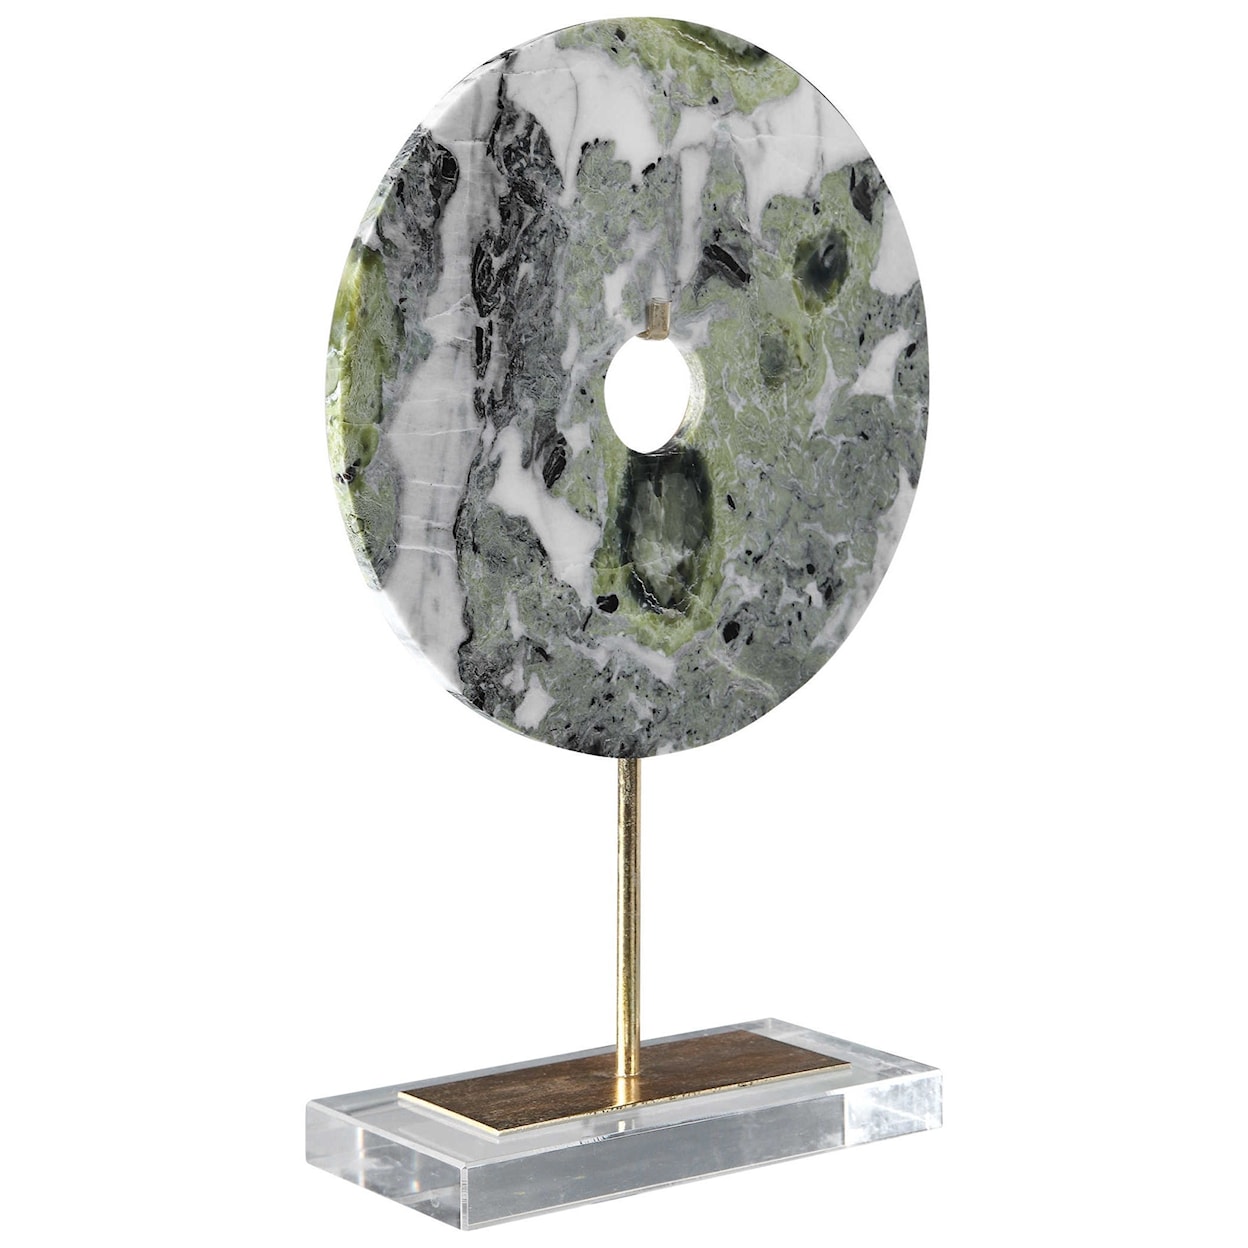 Uttermost Accessories - Statues and Figurines Irelyn Marble Disk Sculpture